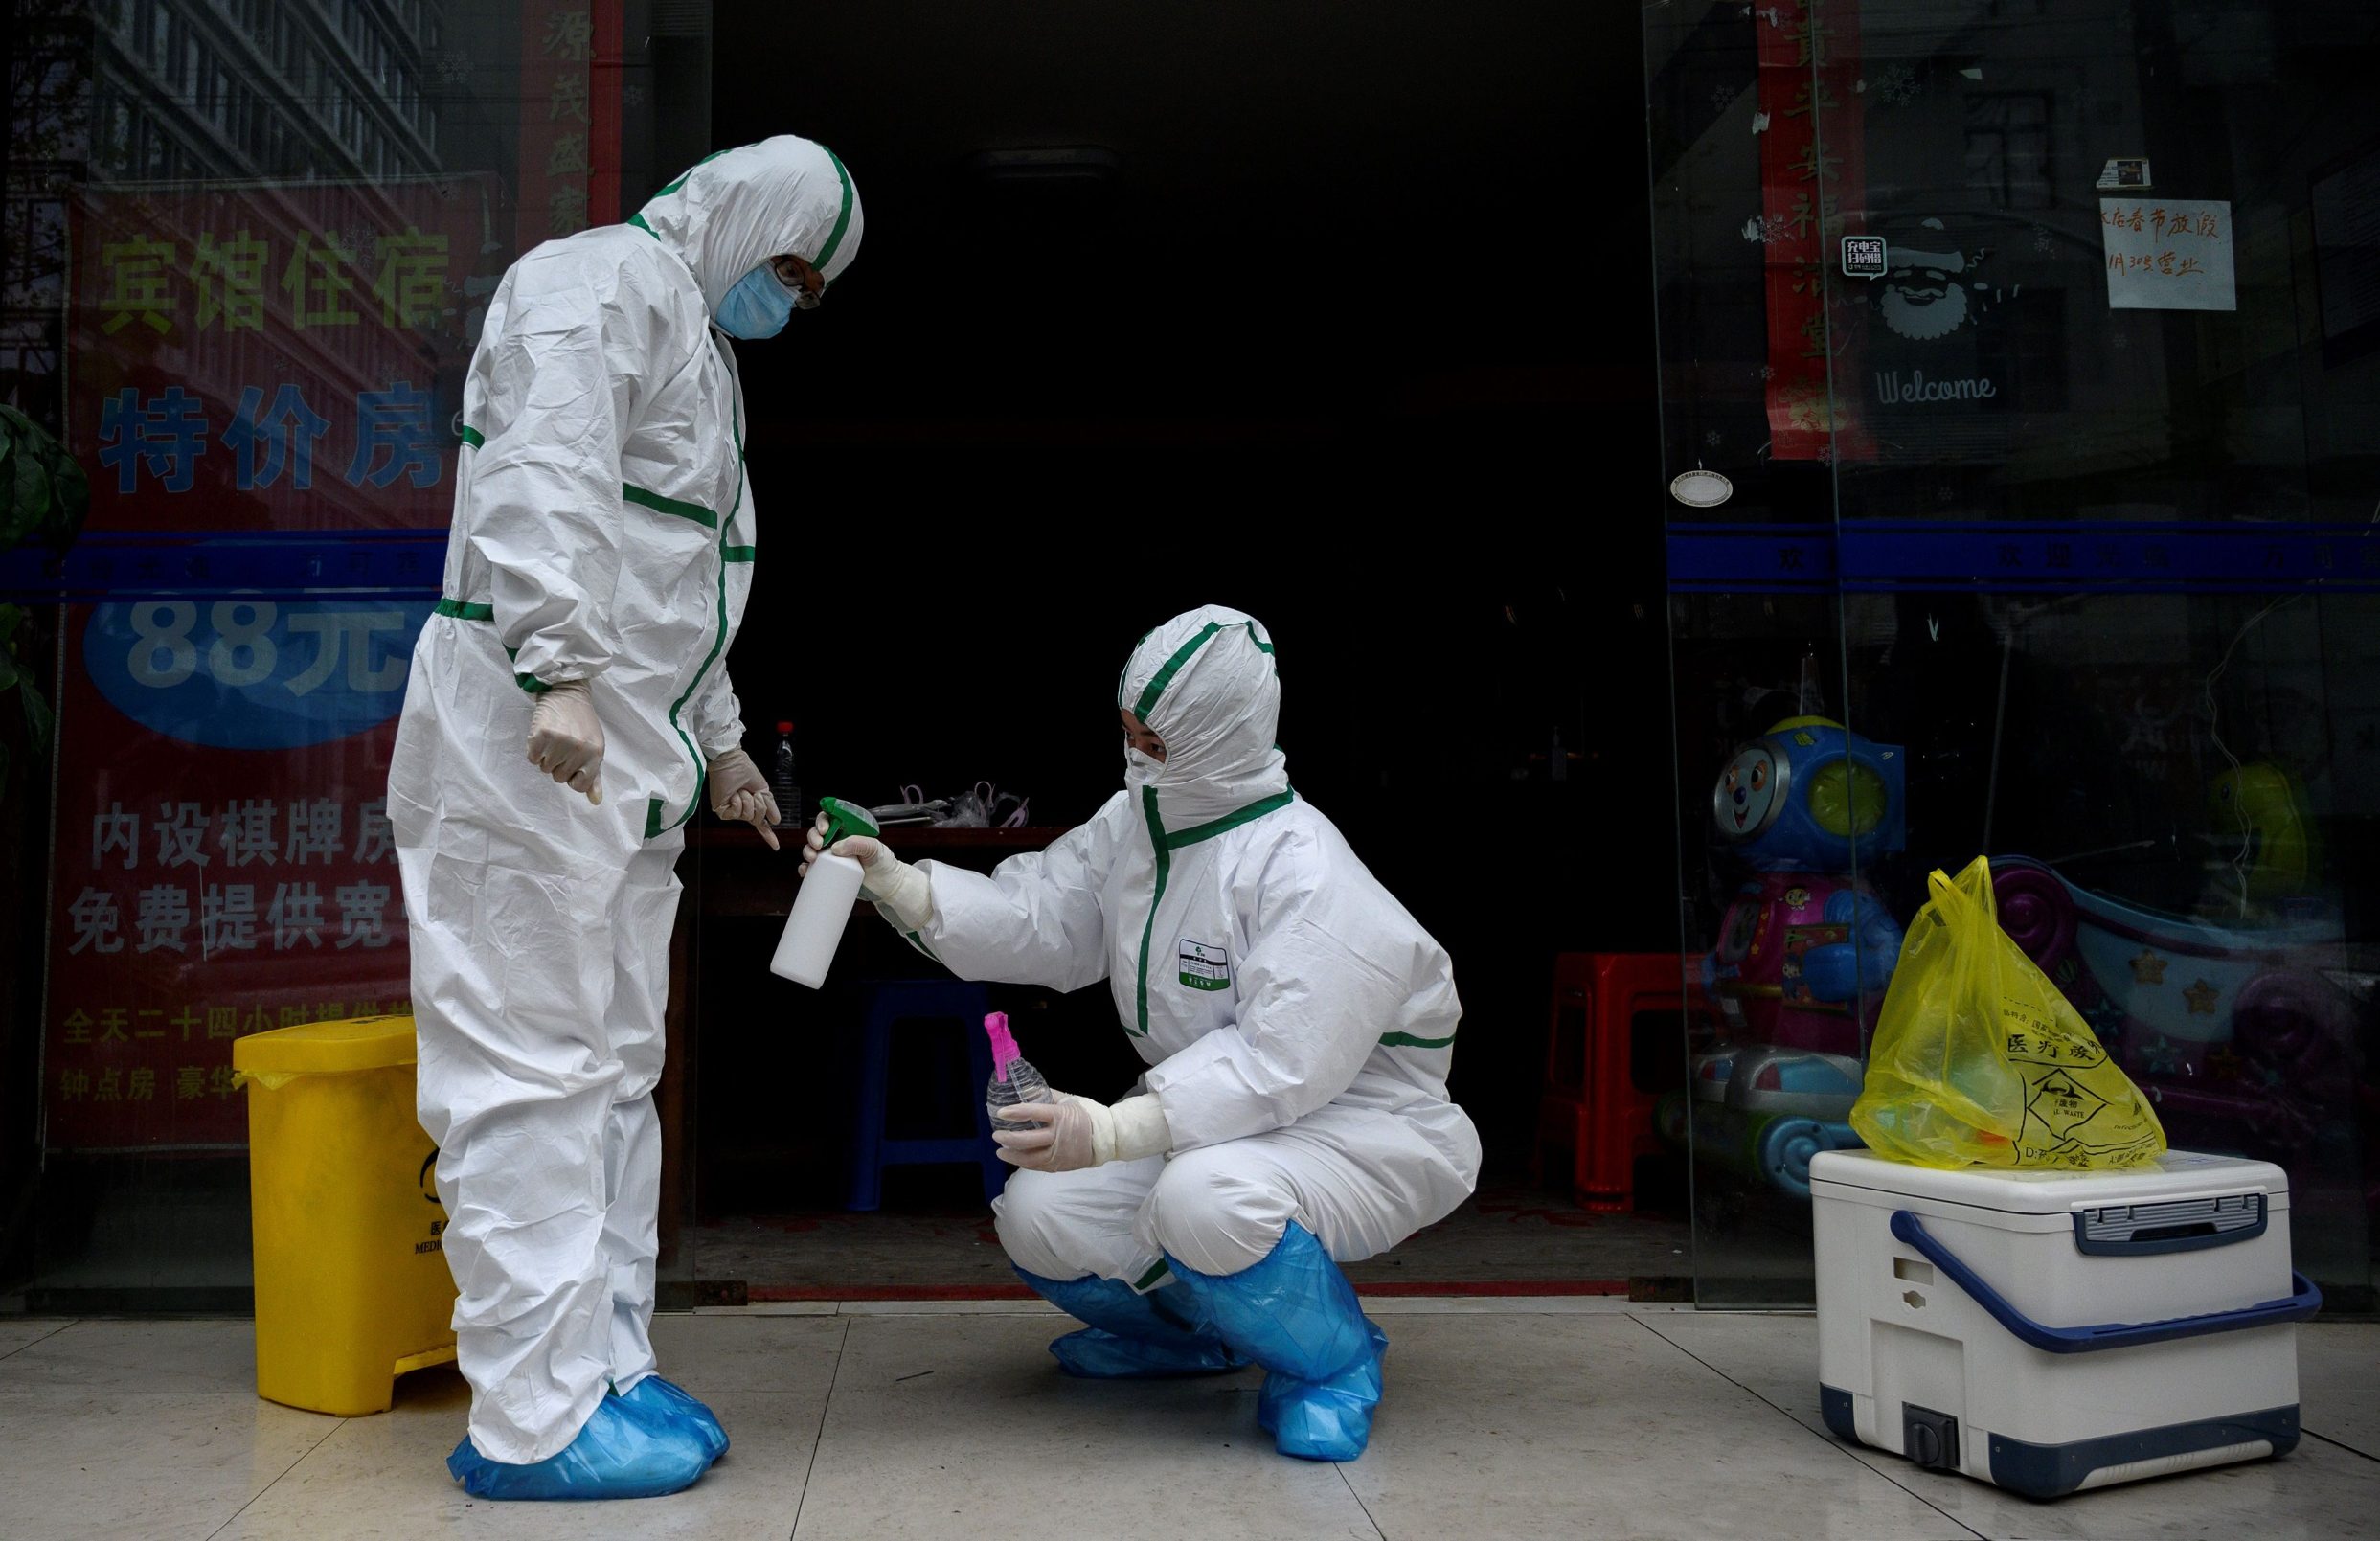 A medical worker wearing a hazmat suit disinfects a colleague at a testing clinic for COVID-19 novel coronavirus in Wuhan, in China's central Hubei province on March 29, 2020. (Photo by NOEL CELIS / AFP)